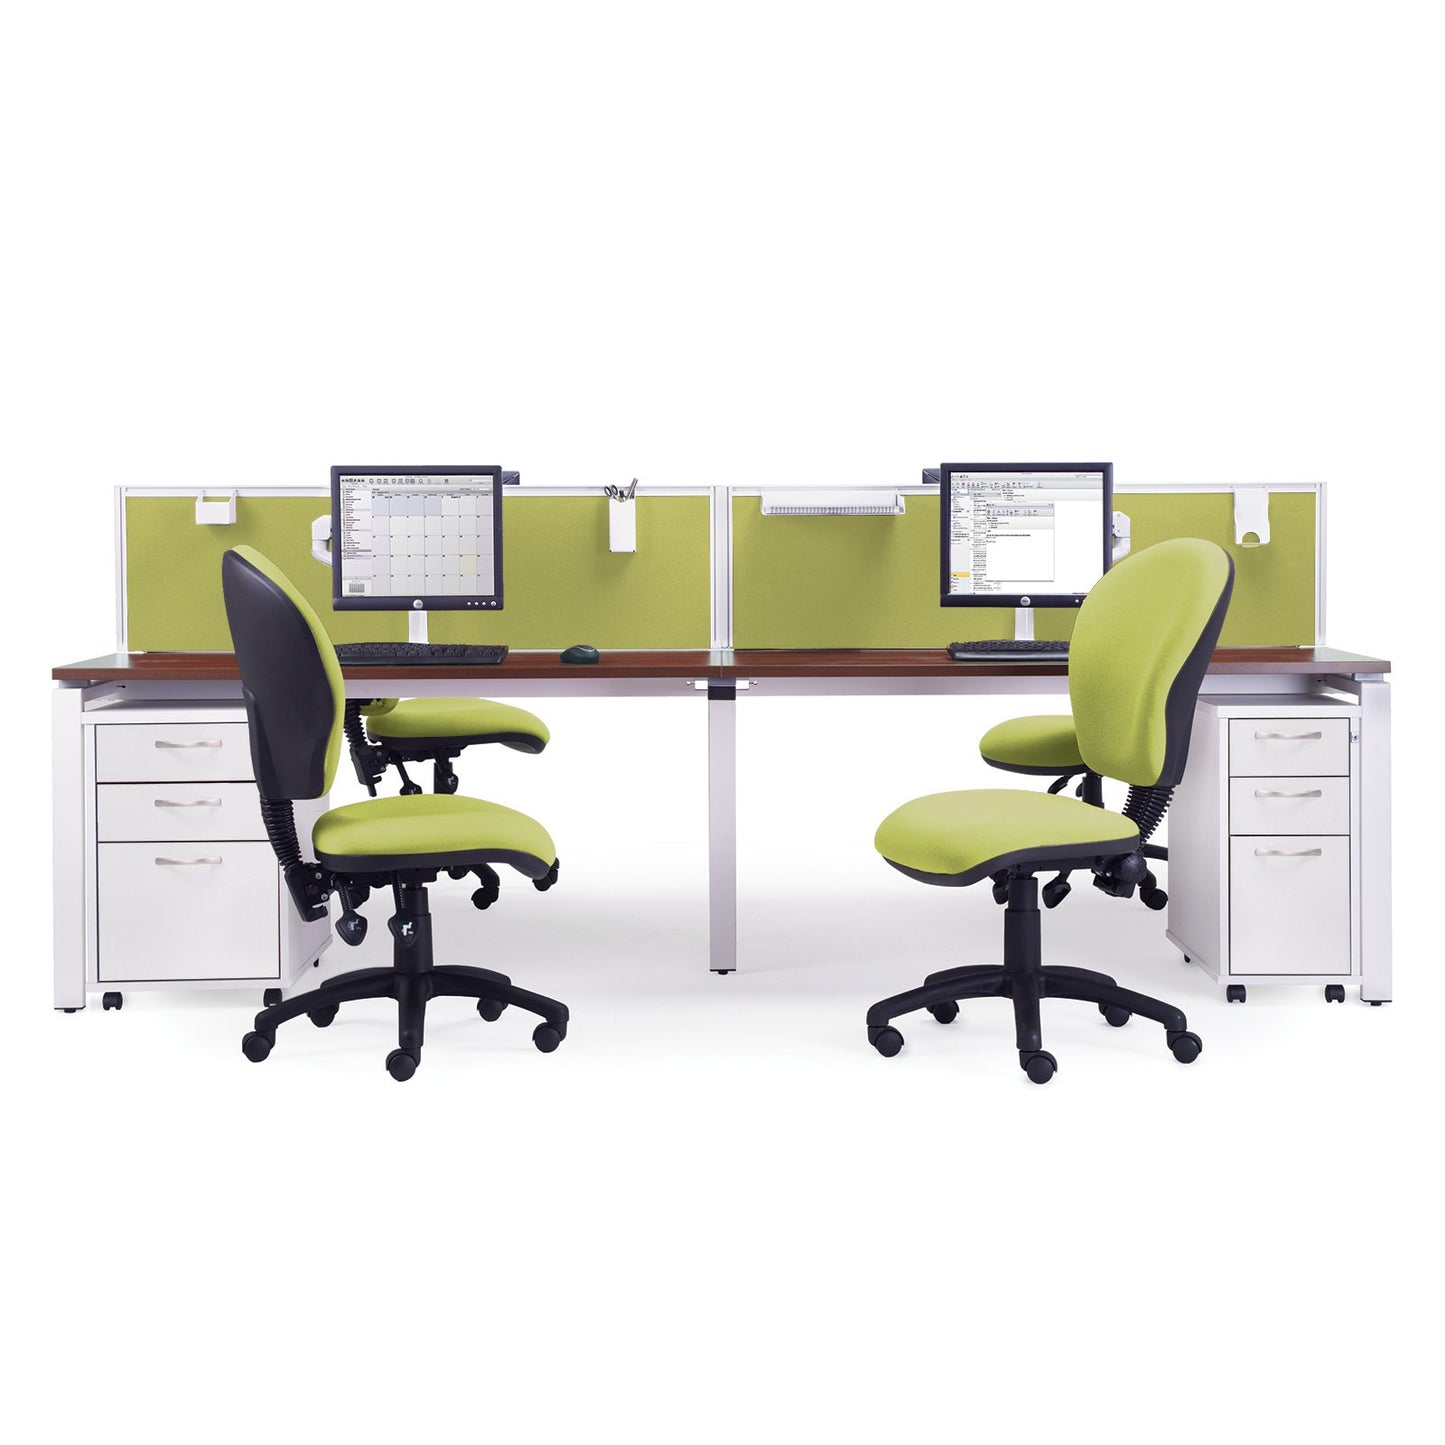 4 Persons - Adapt double back to back desks 1200mm deep